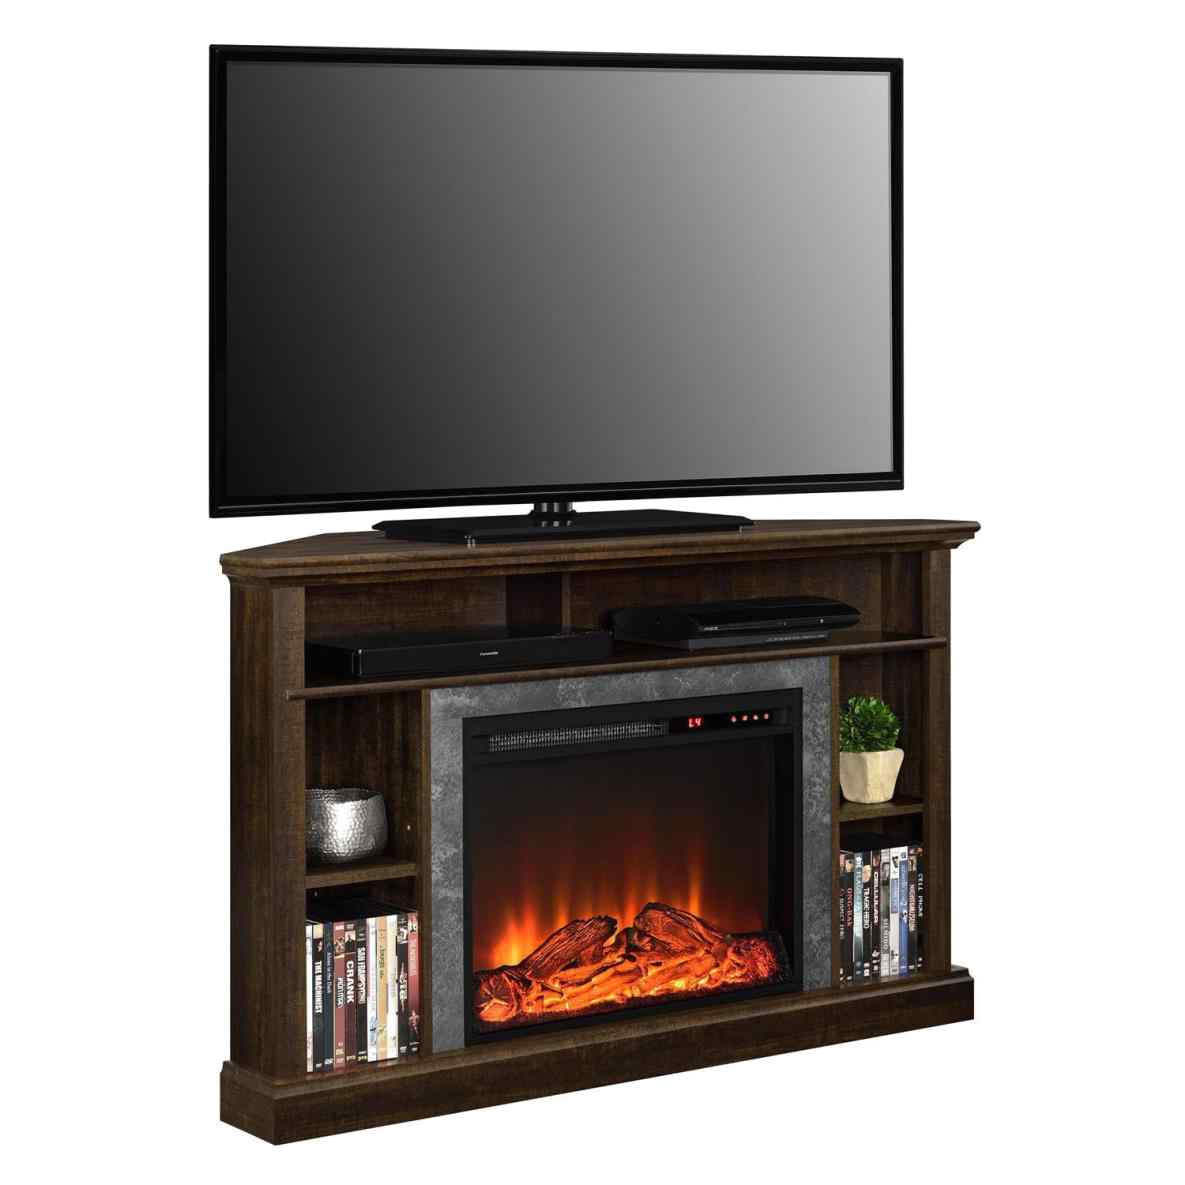 console ember hearth electric fireplace nice fancy inch stands great amazing popular high definition wallpaper tures